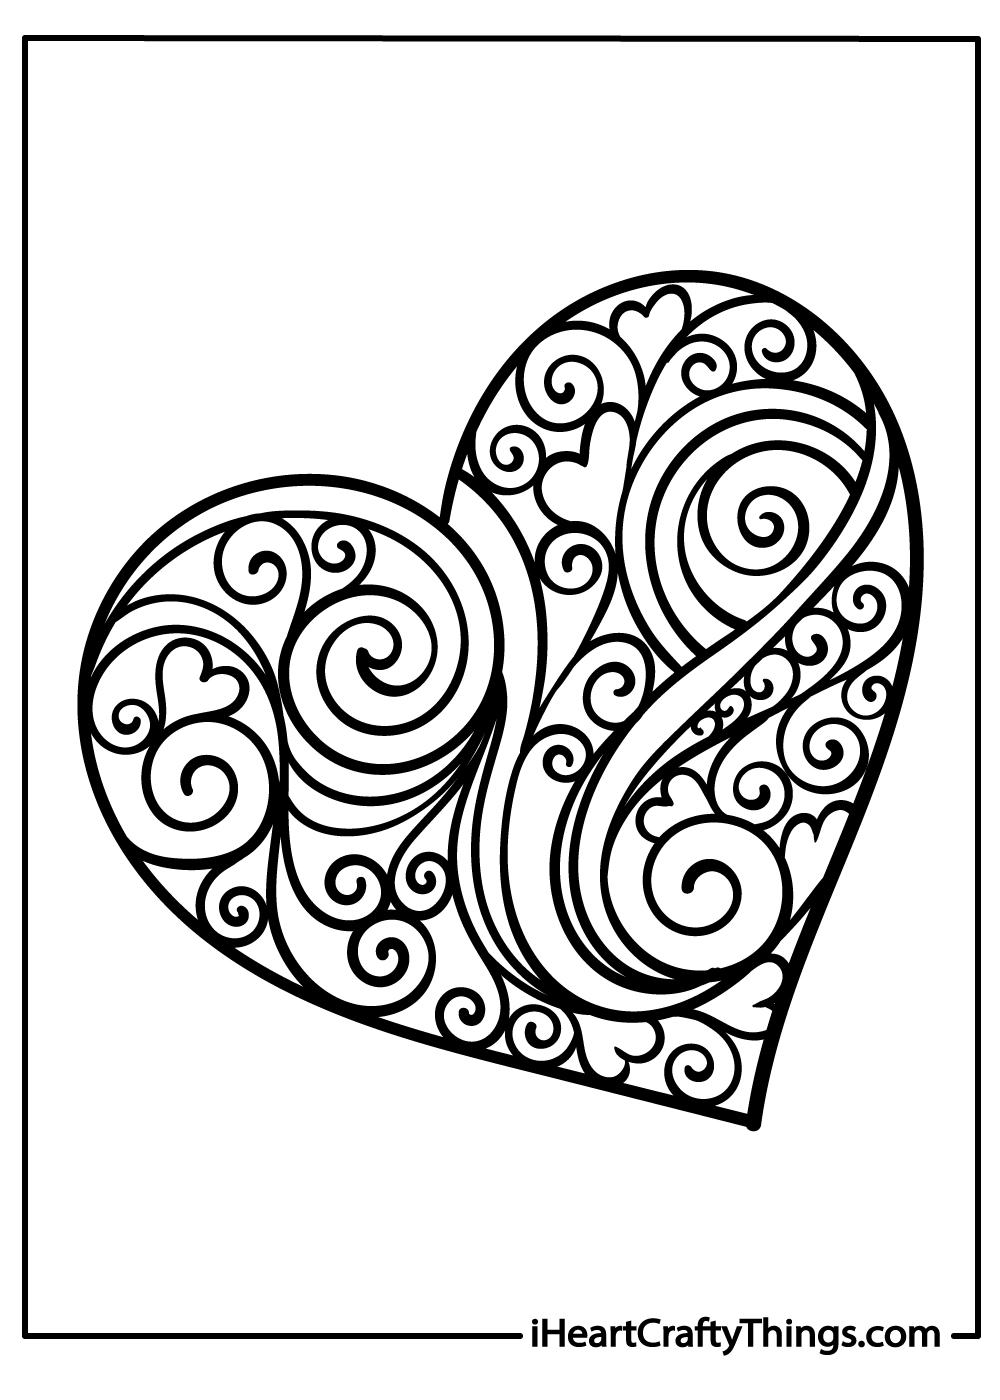 abstract heart coloring page